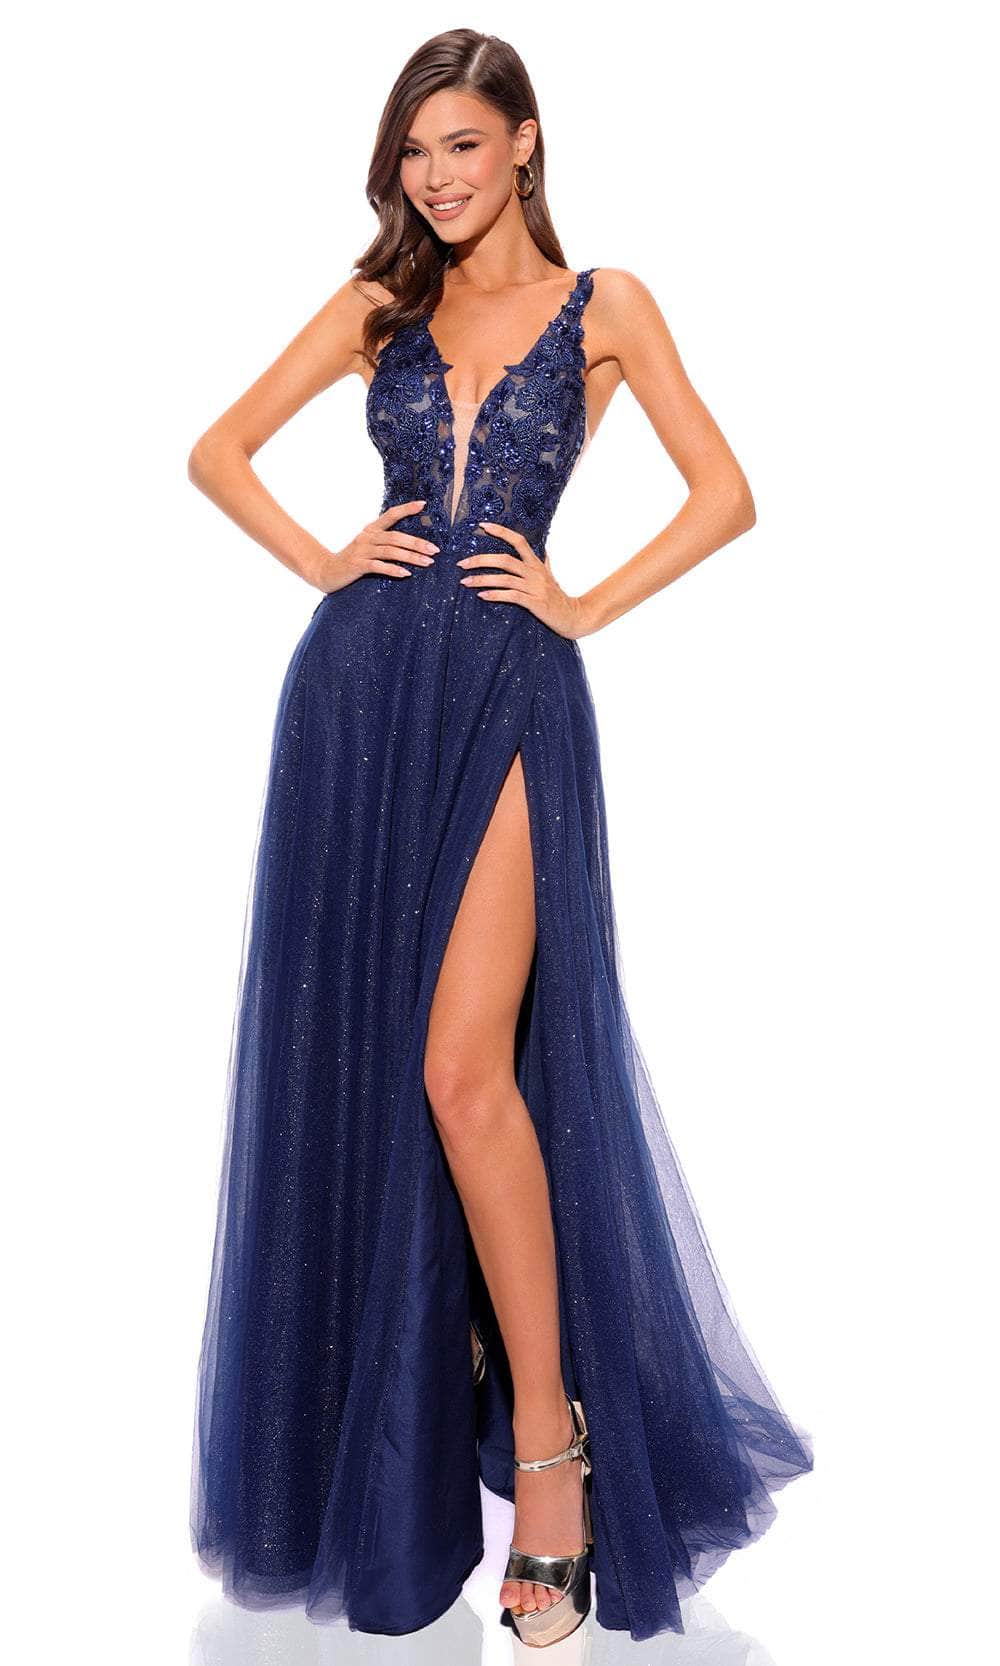 Amarra 88840 - Floral Embroidered Prom Dress 2 / Navy